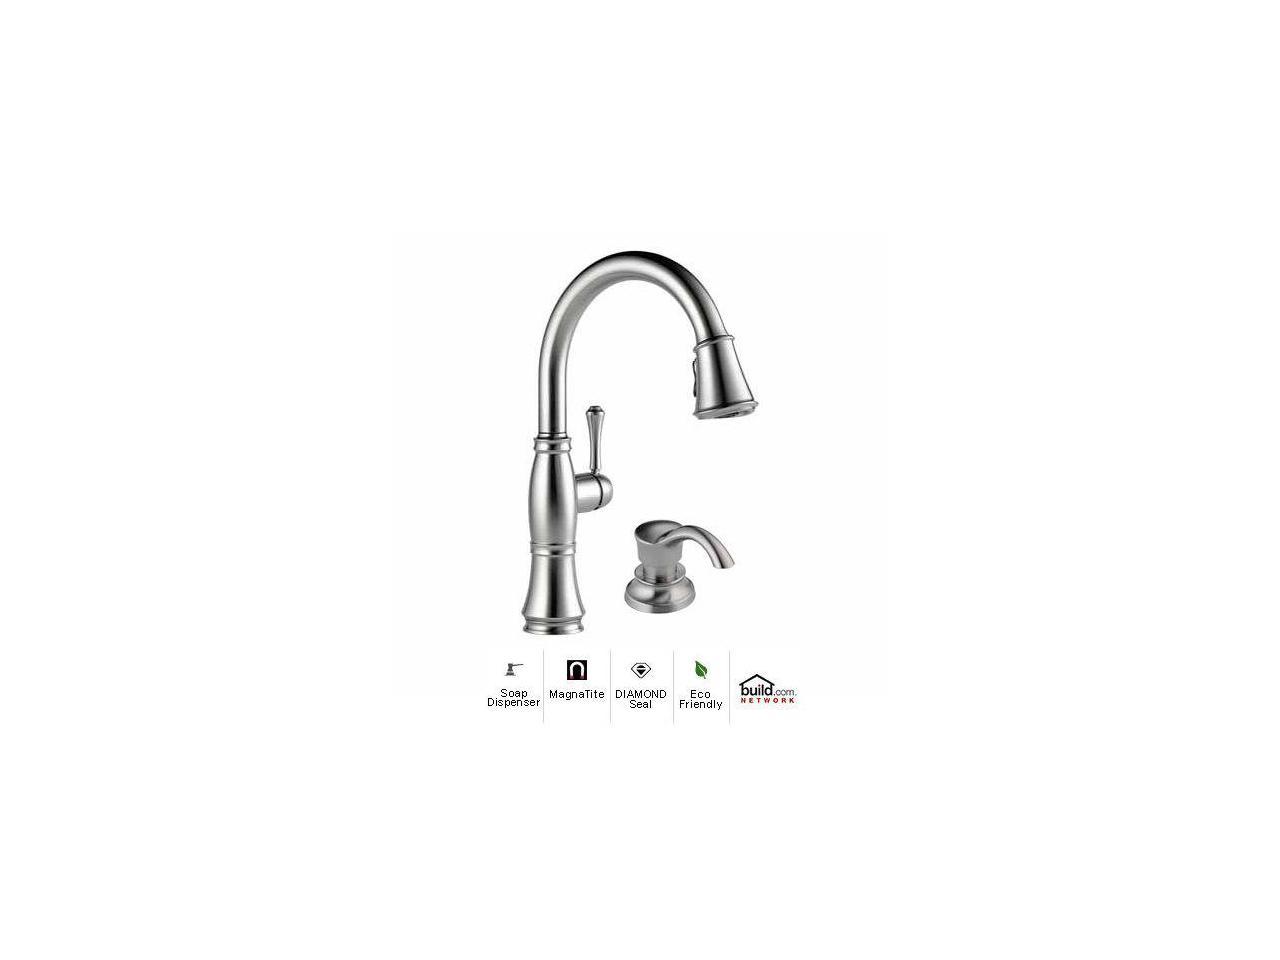 Delta 9197 Ar Dst Sd Cassidy Pullout Spray Kitchen Faucet With Magnatite Docking